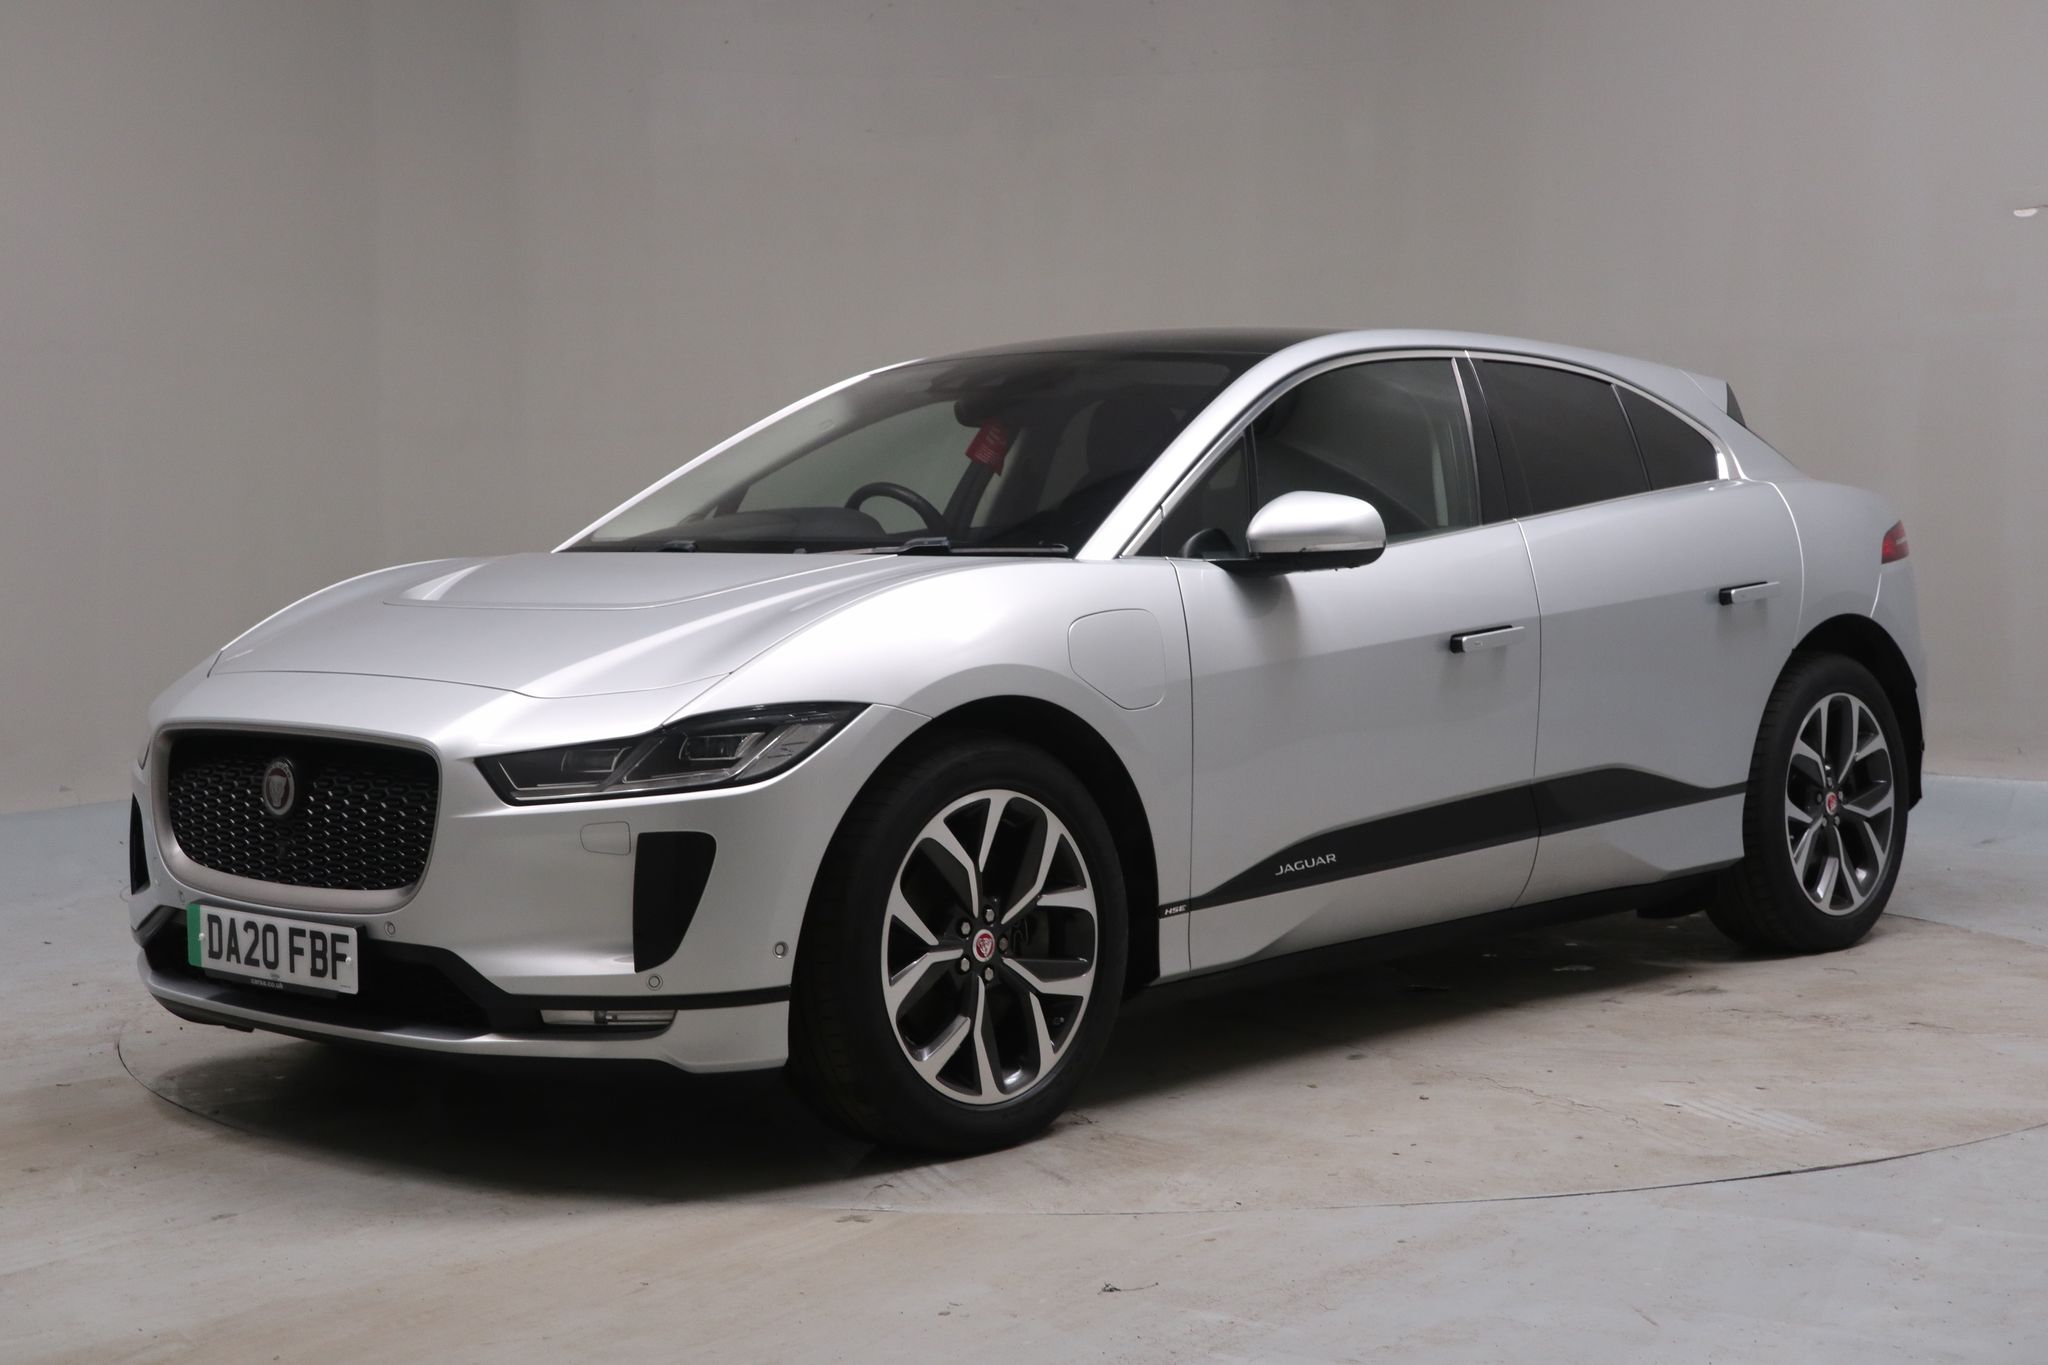 2020 used Jaguar I-PACE 400 90kWh HSE 4WD (400 ps)